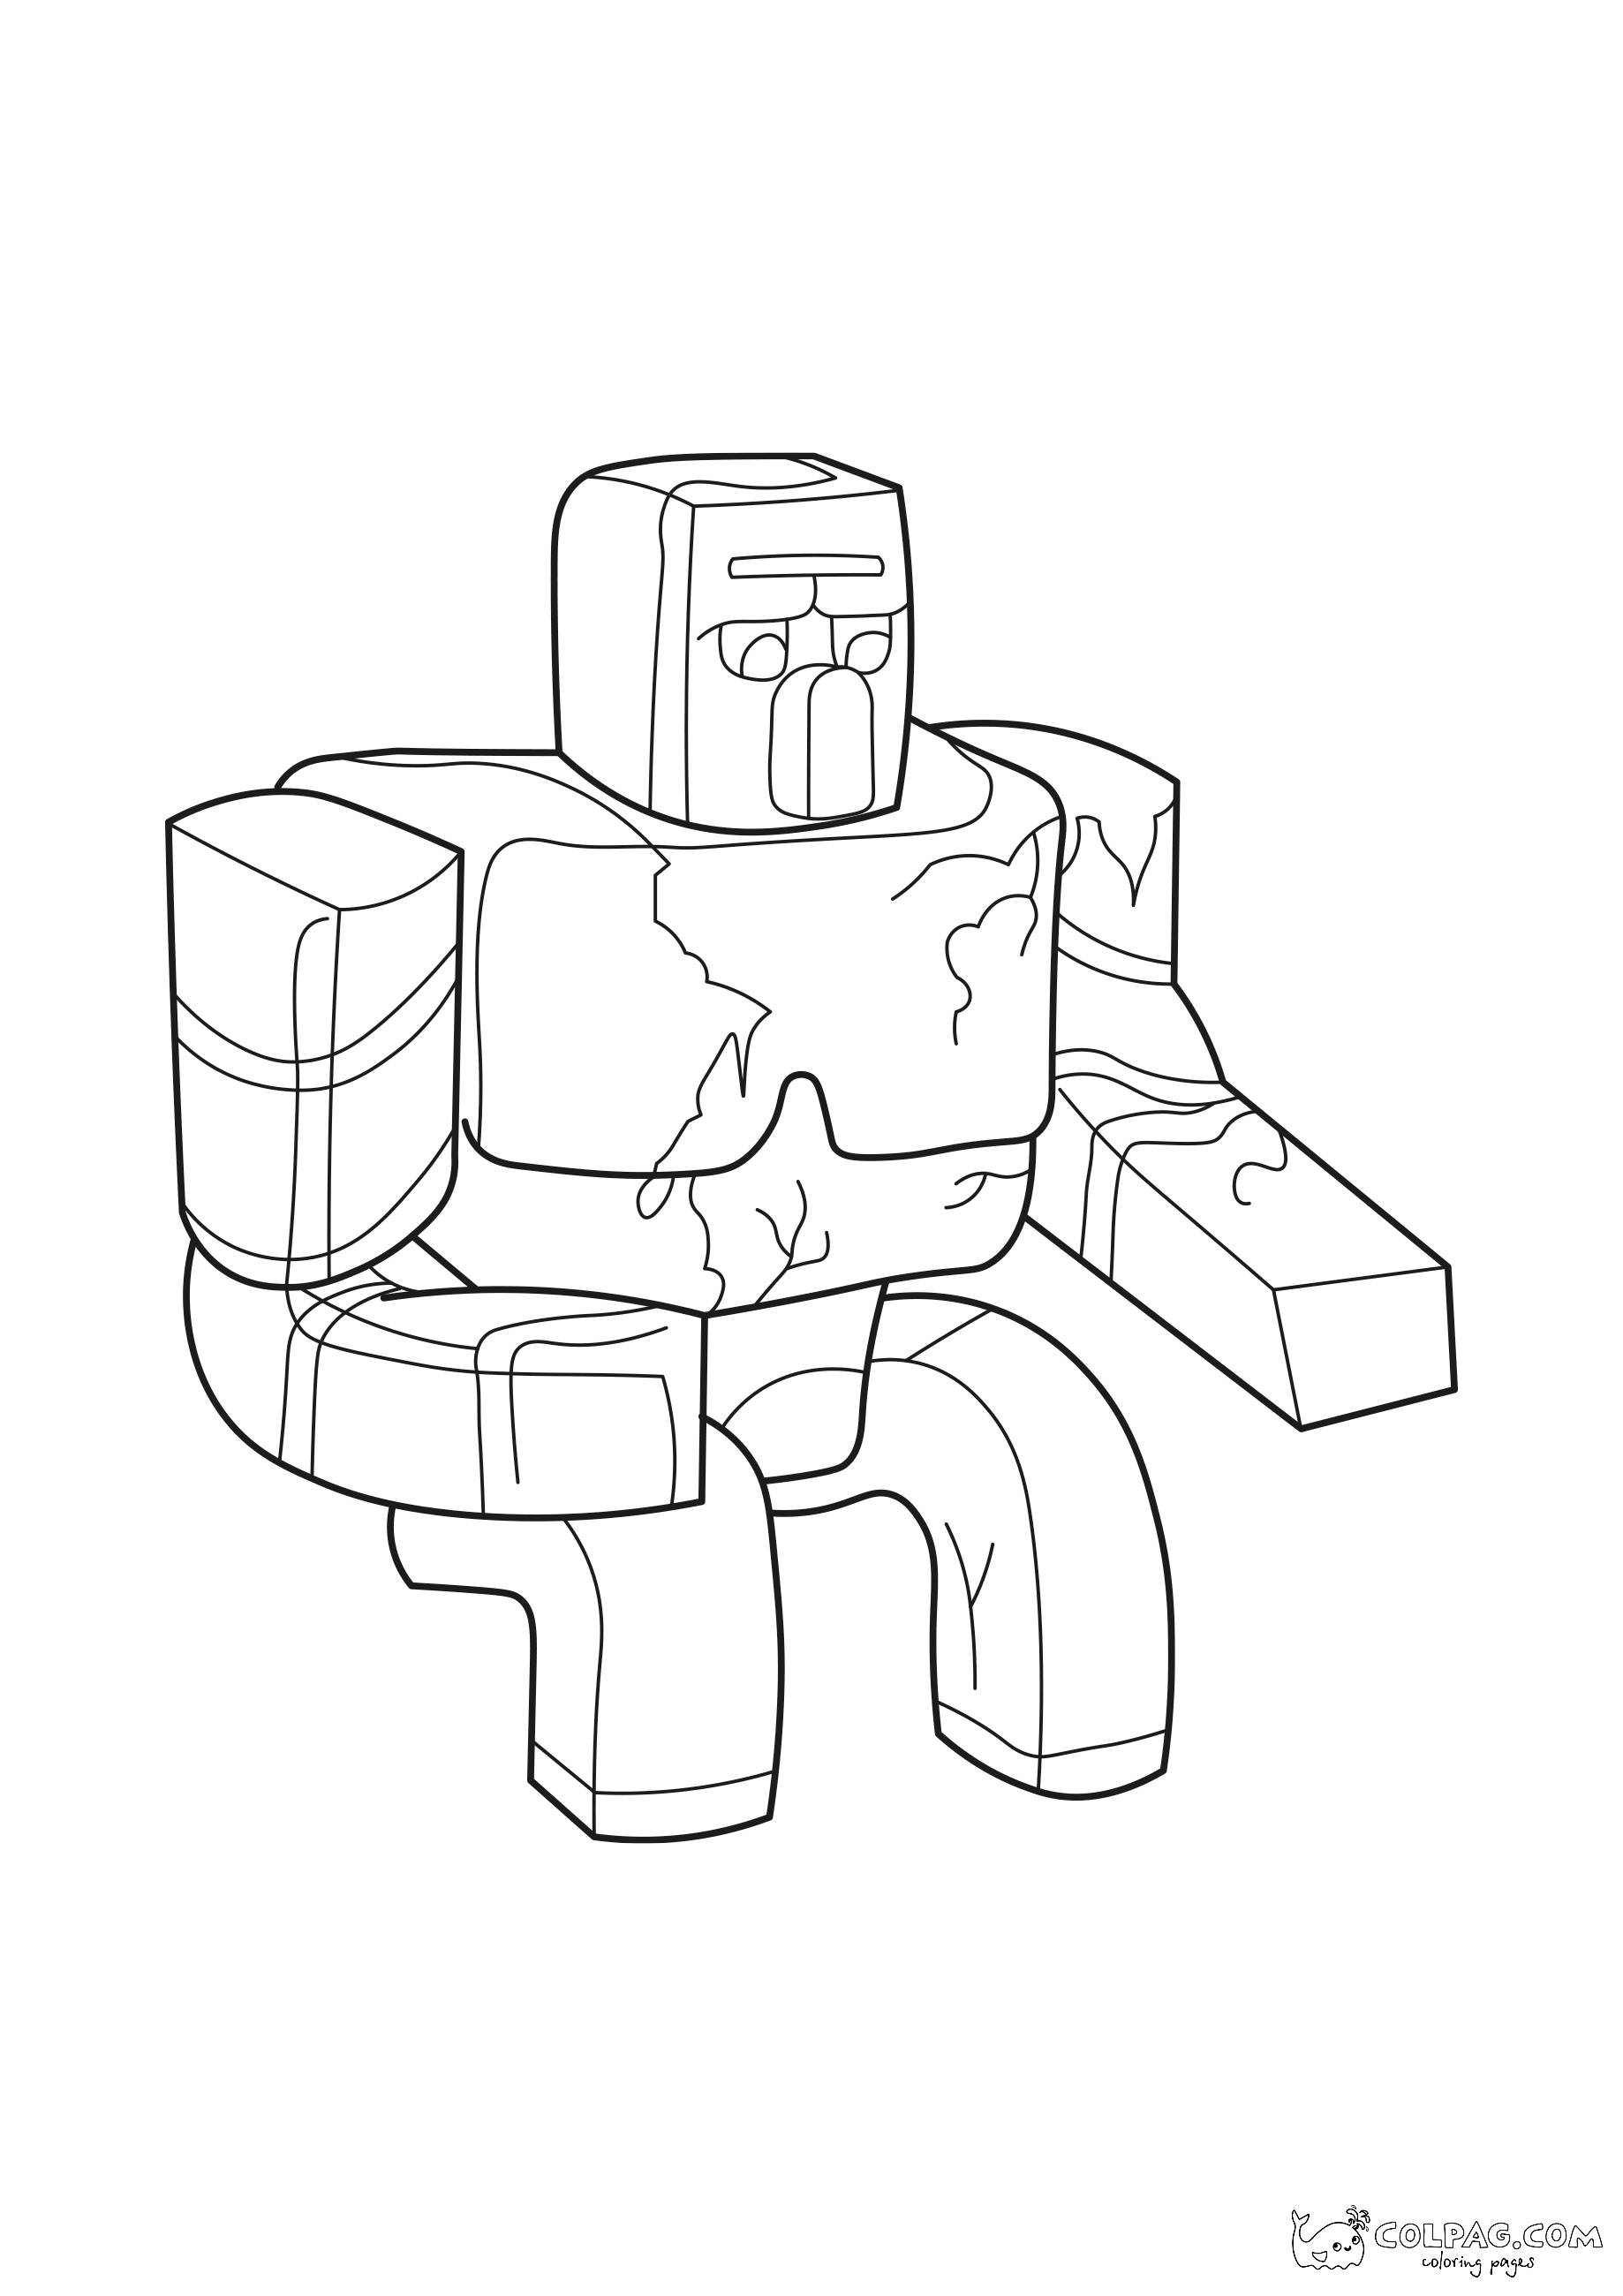 iron-golem-1-minecraft-coloring-page-colpag